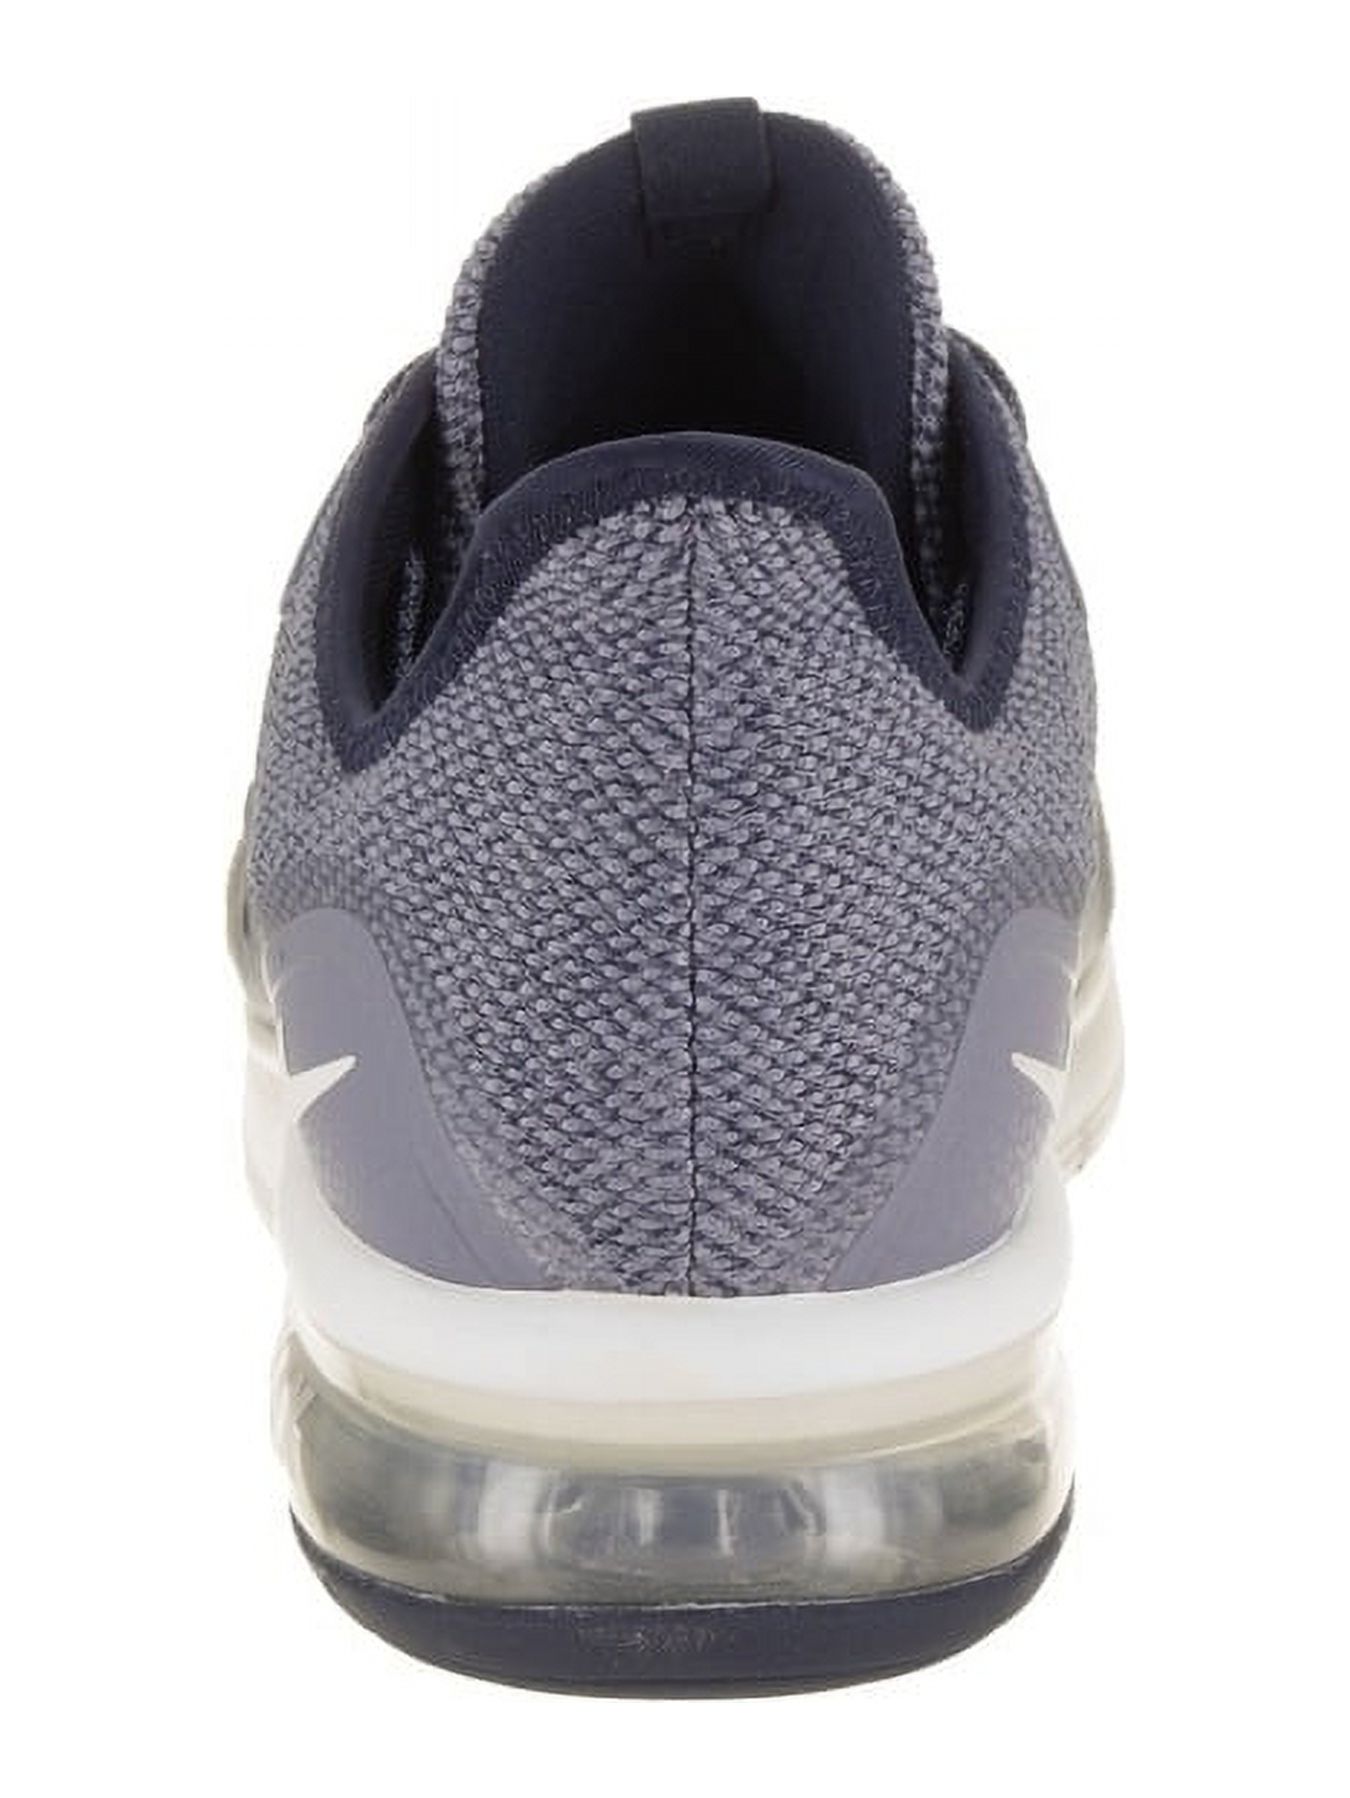 Nike Men's Air Max Sequent 3 Running Shoe - image 5 of 5